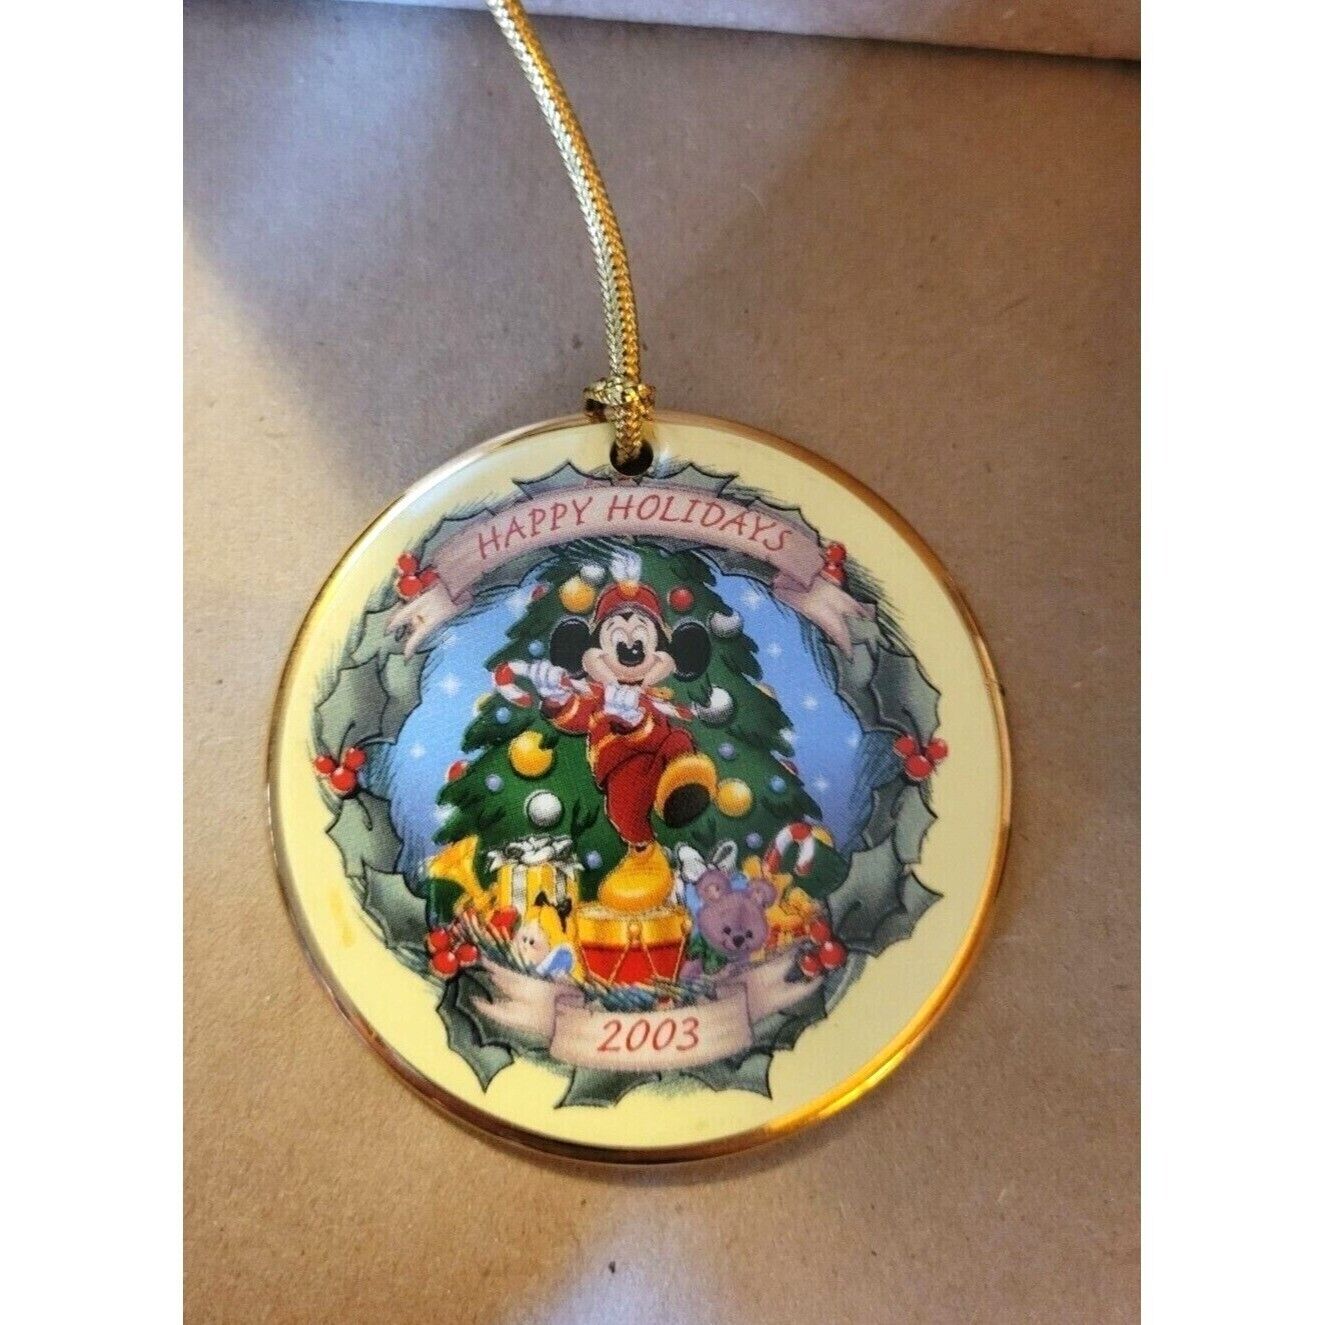 2003 Disney's Christmas Ceramic Ornament featuring Mickey Mouse